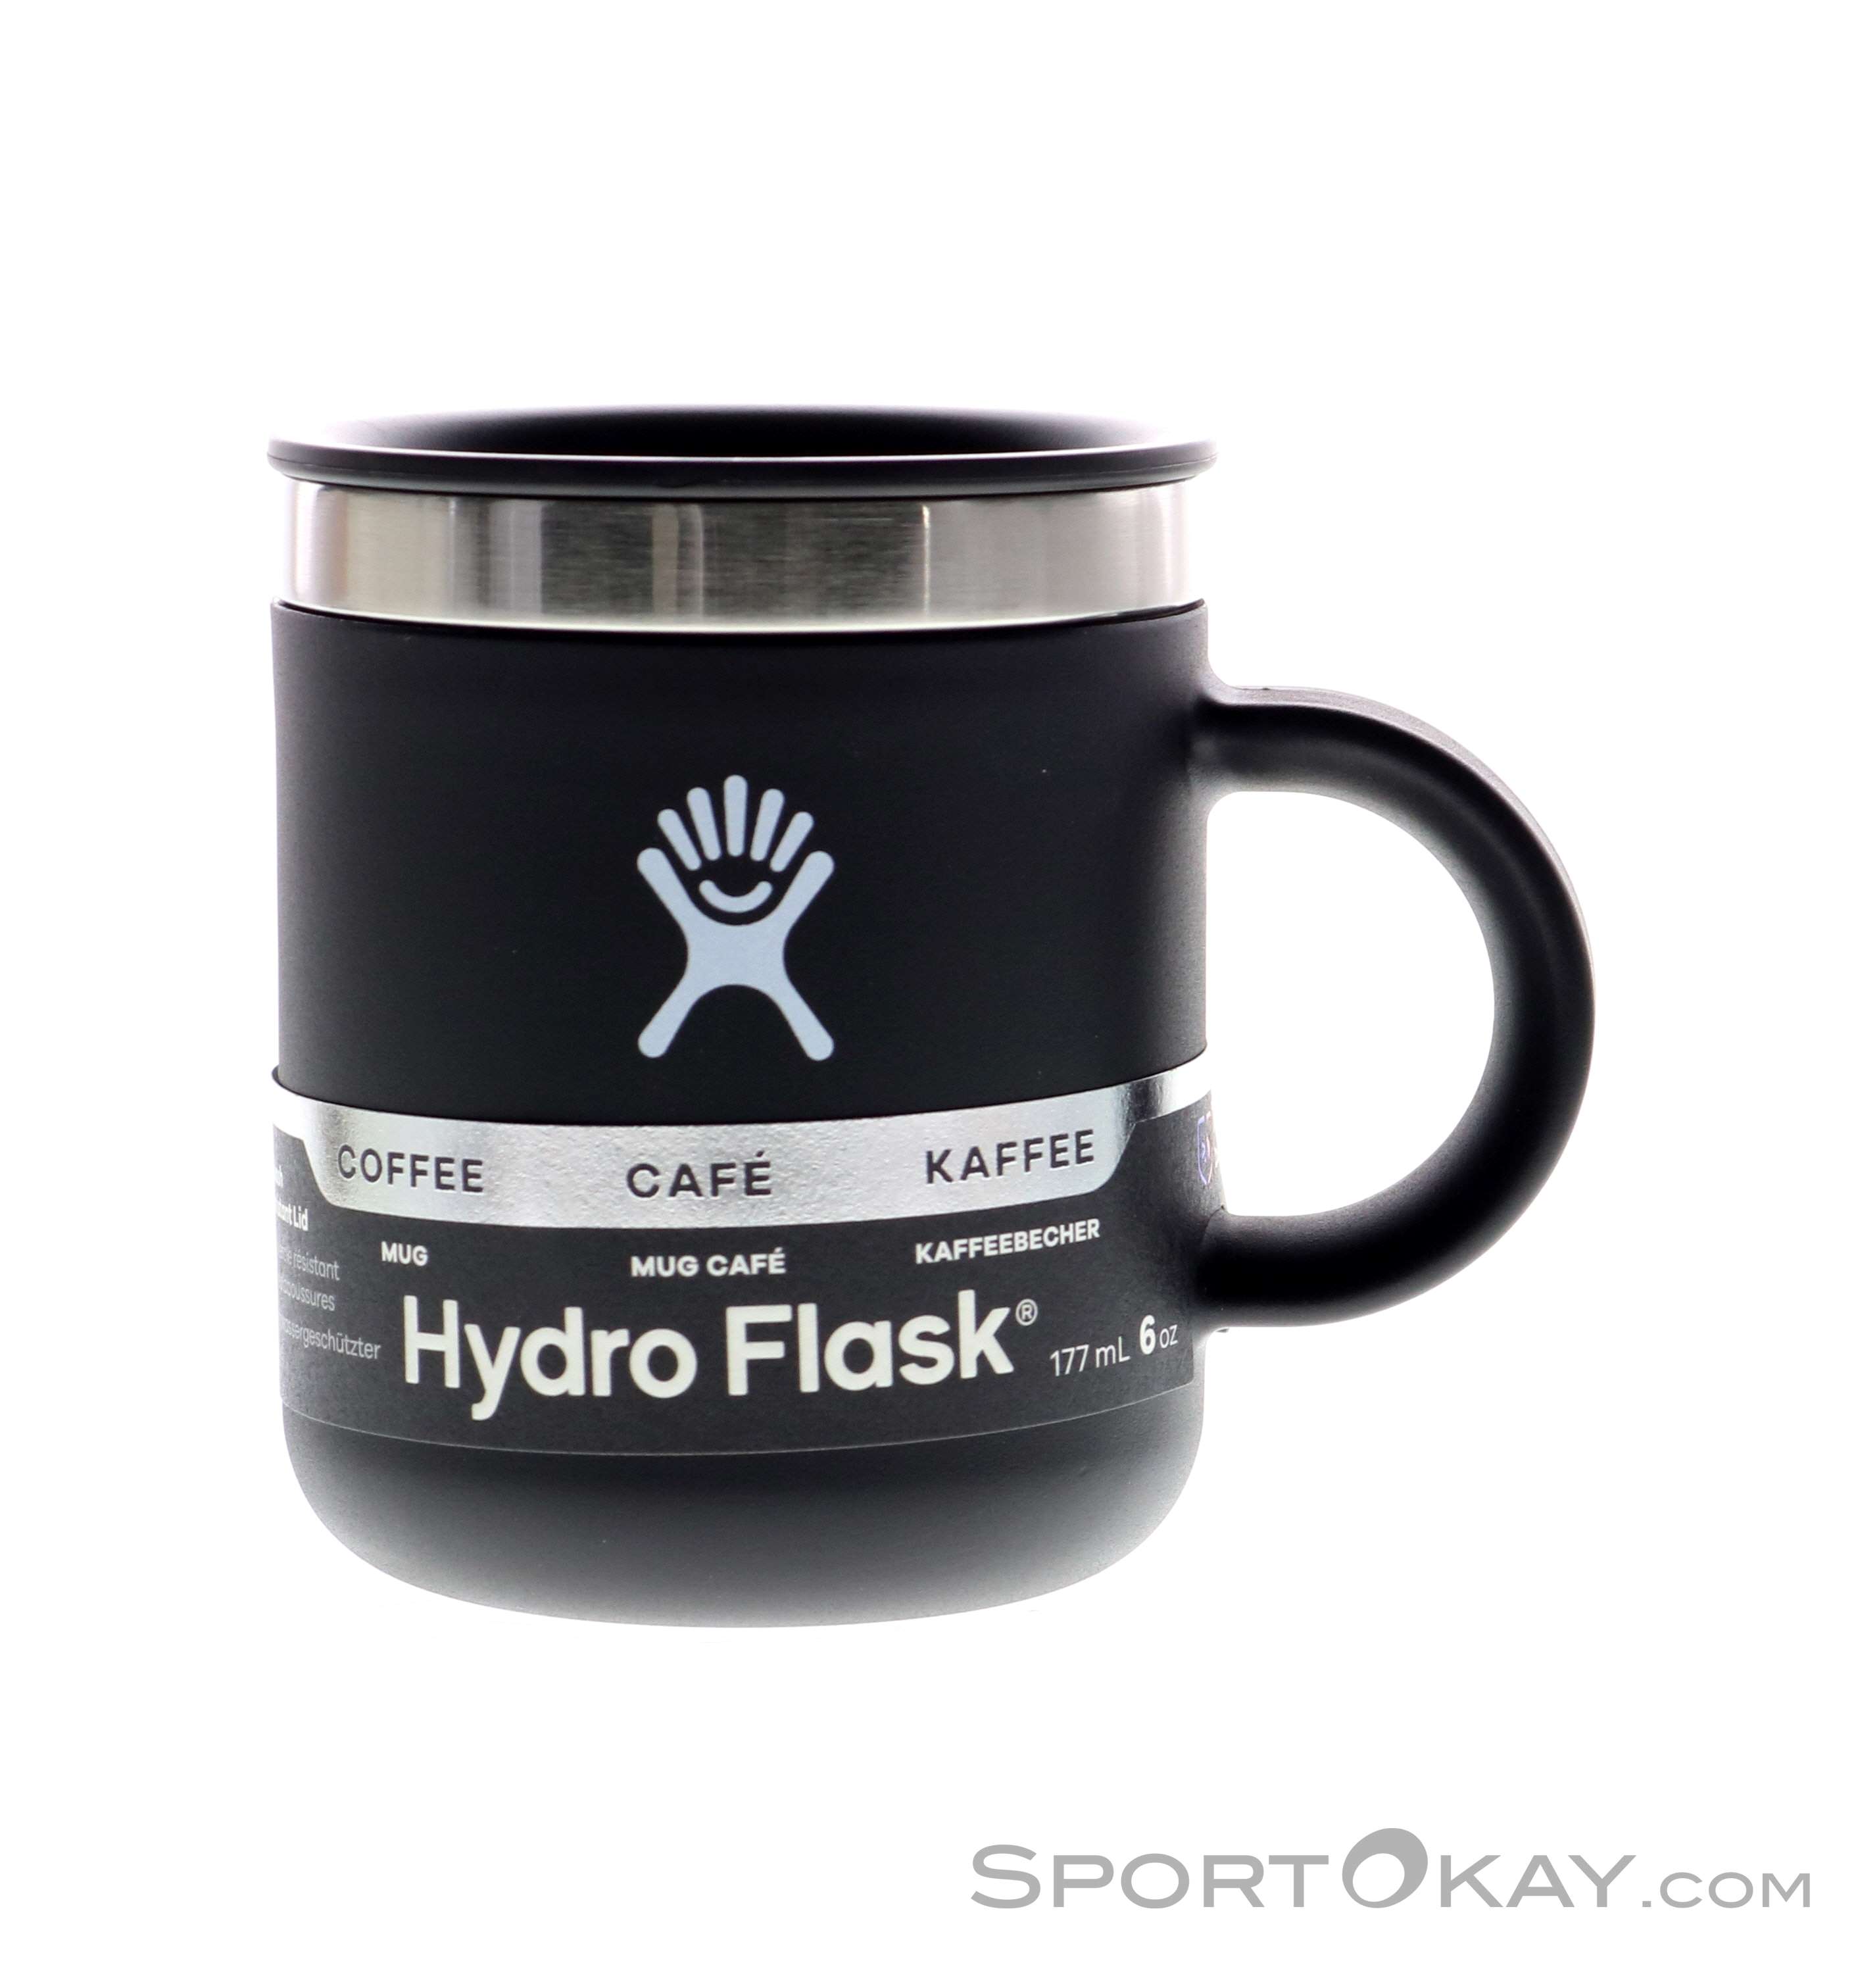 Hydro Flask Flask 6 oz Mug 177ml Thermo Cup - Water Bottles